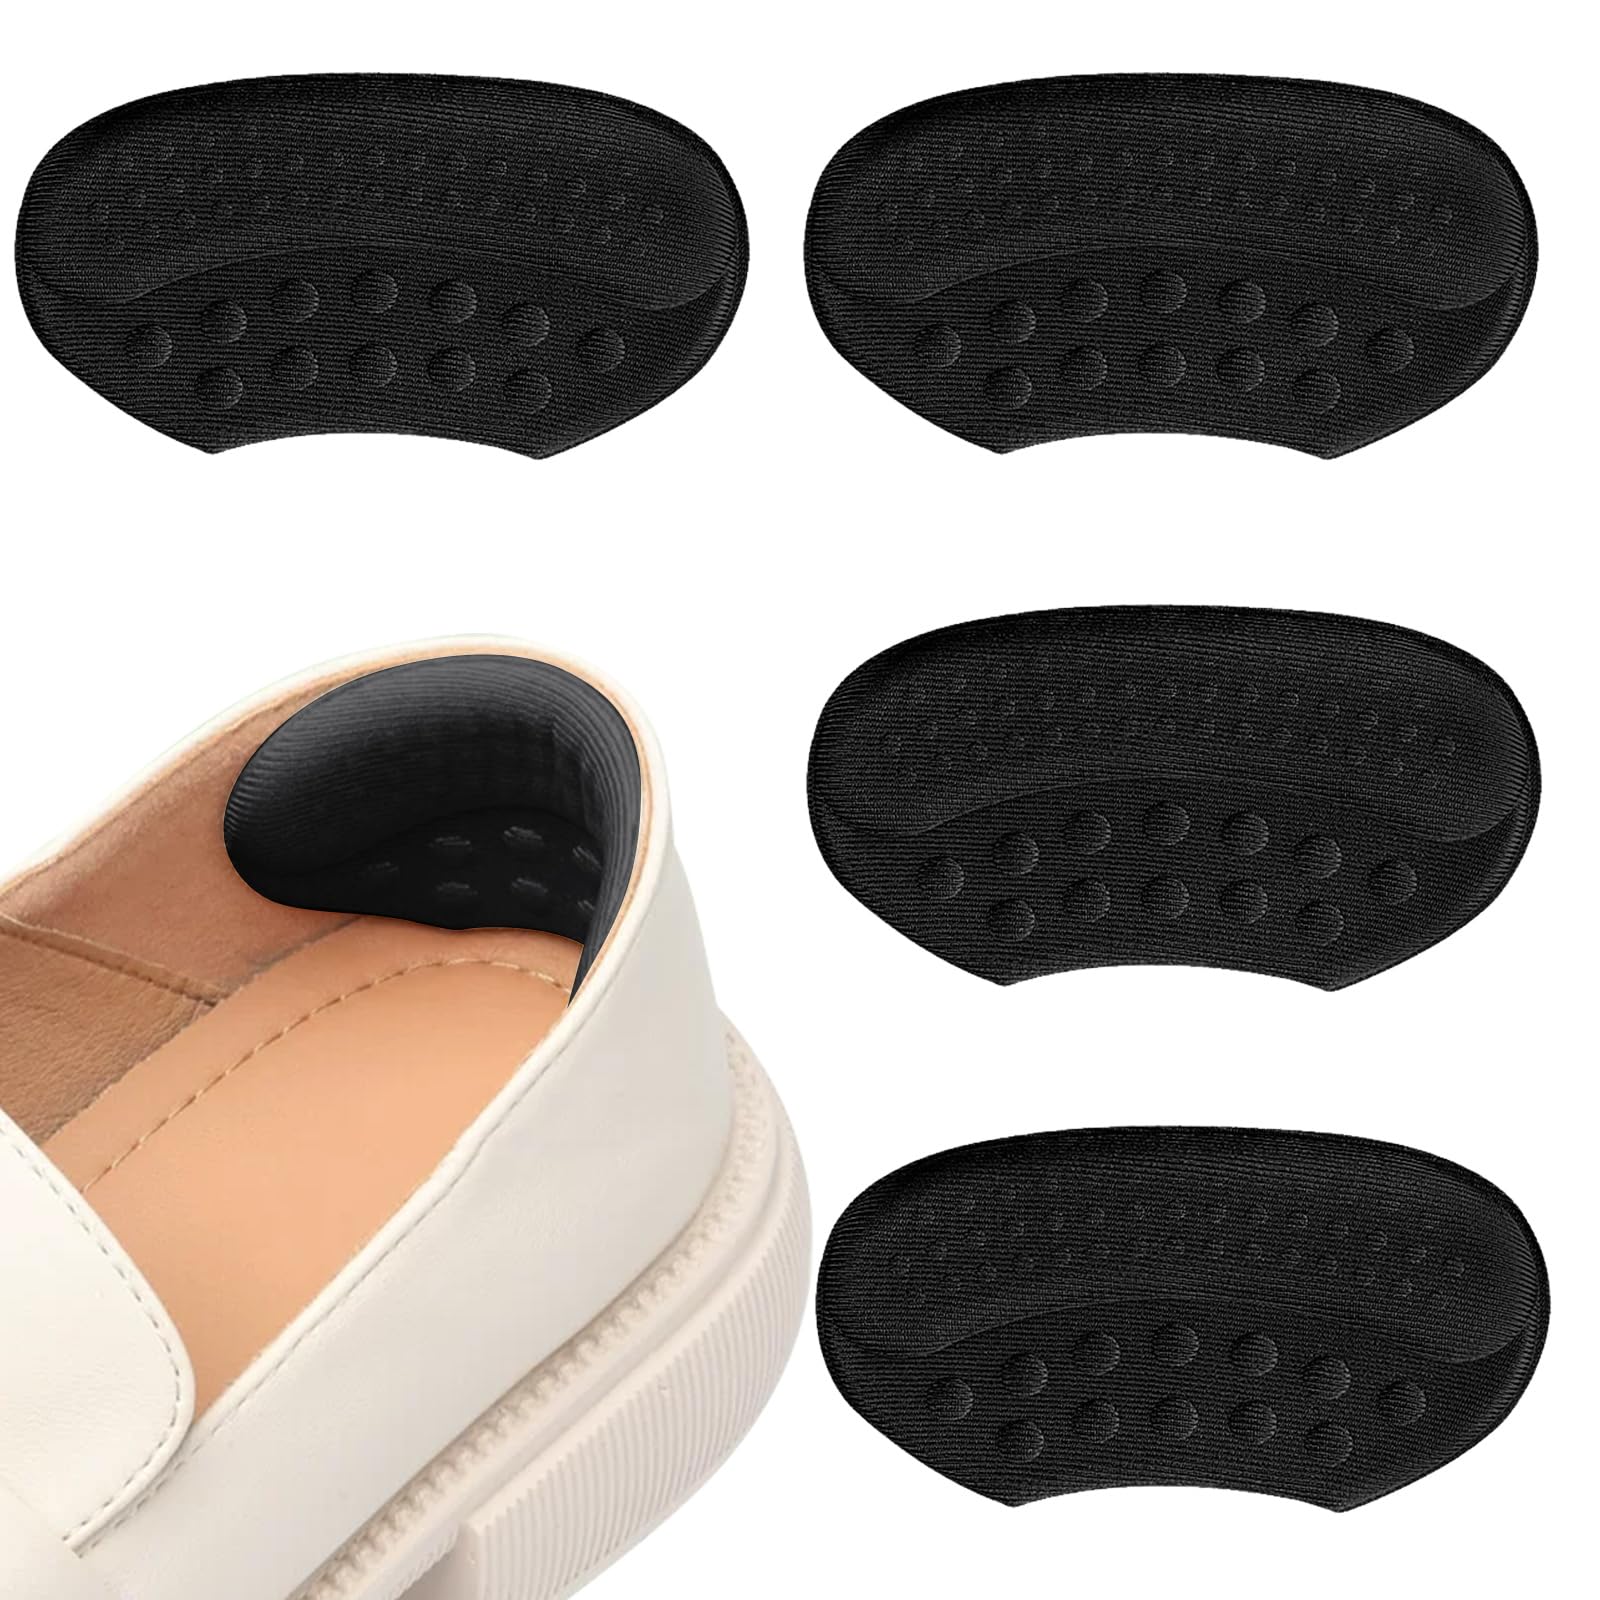 Heel Pads For Shoes That Are Too Big,Heel Grips Inserts Cushion Liners For  Womens or